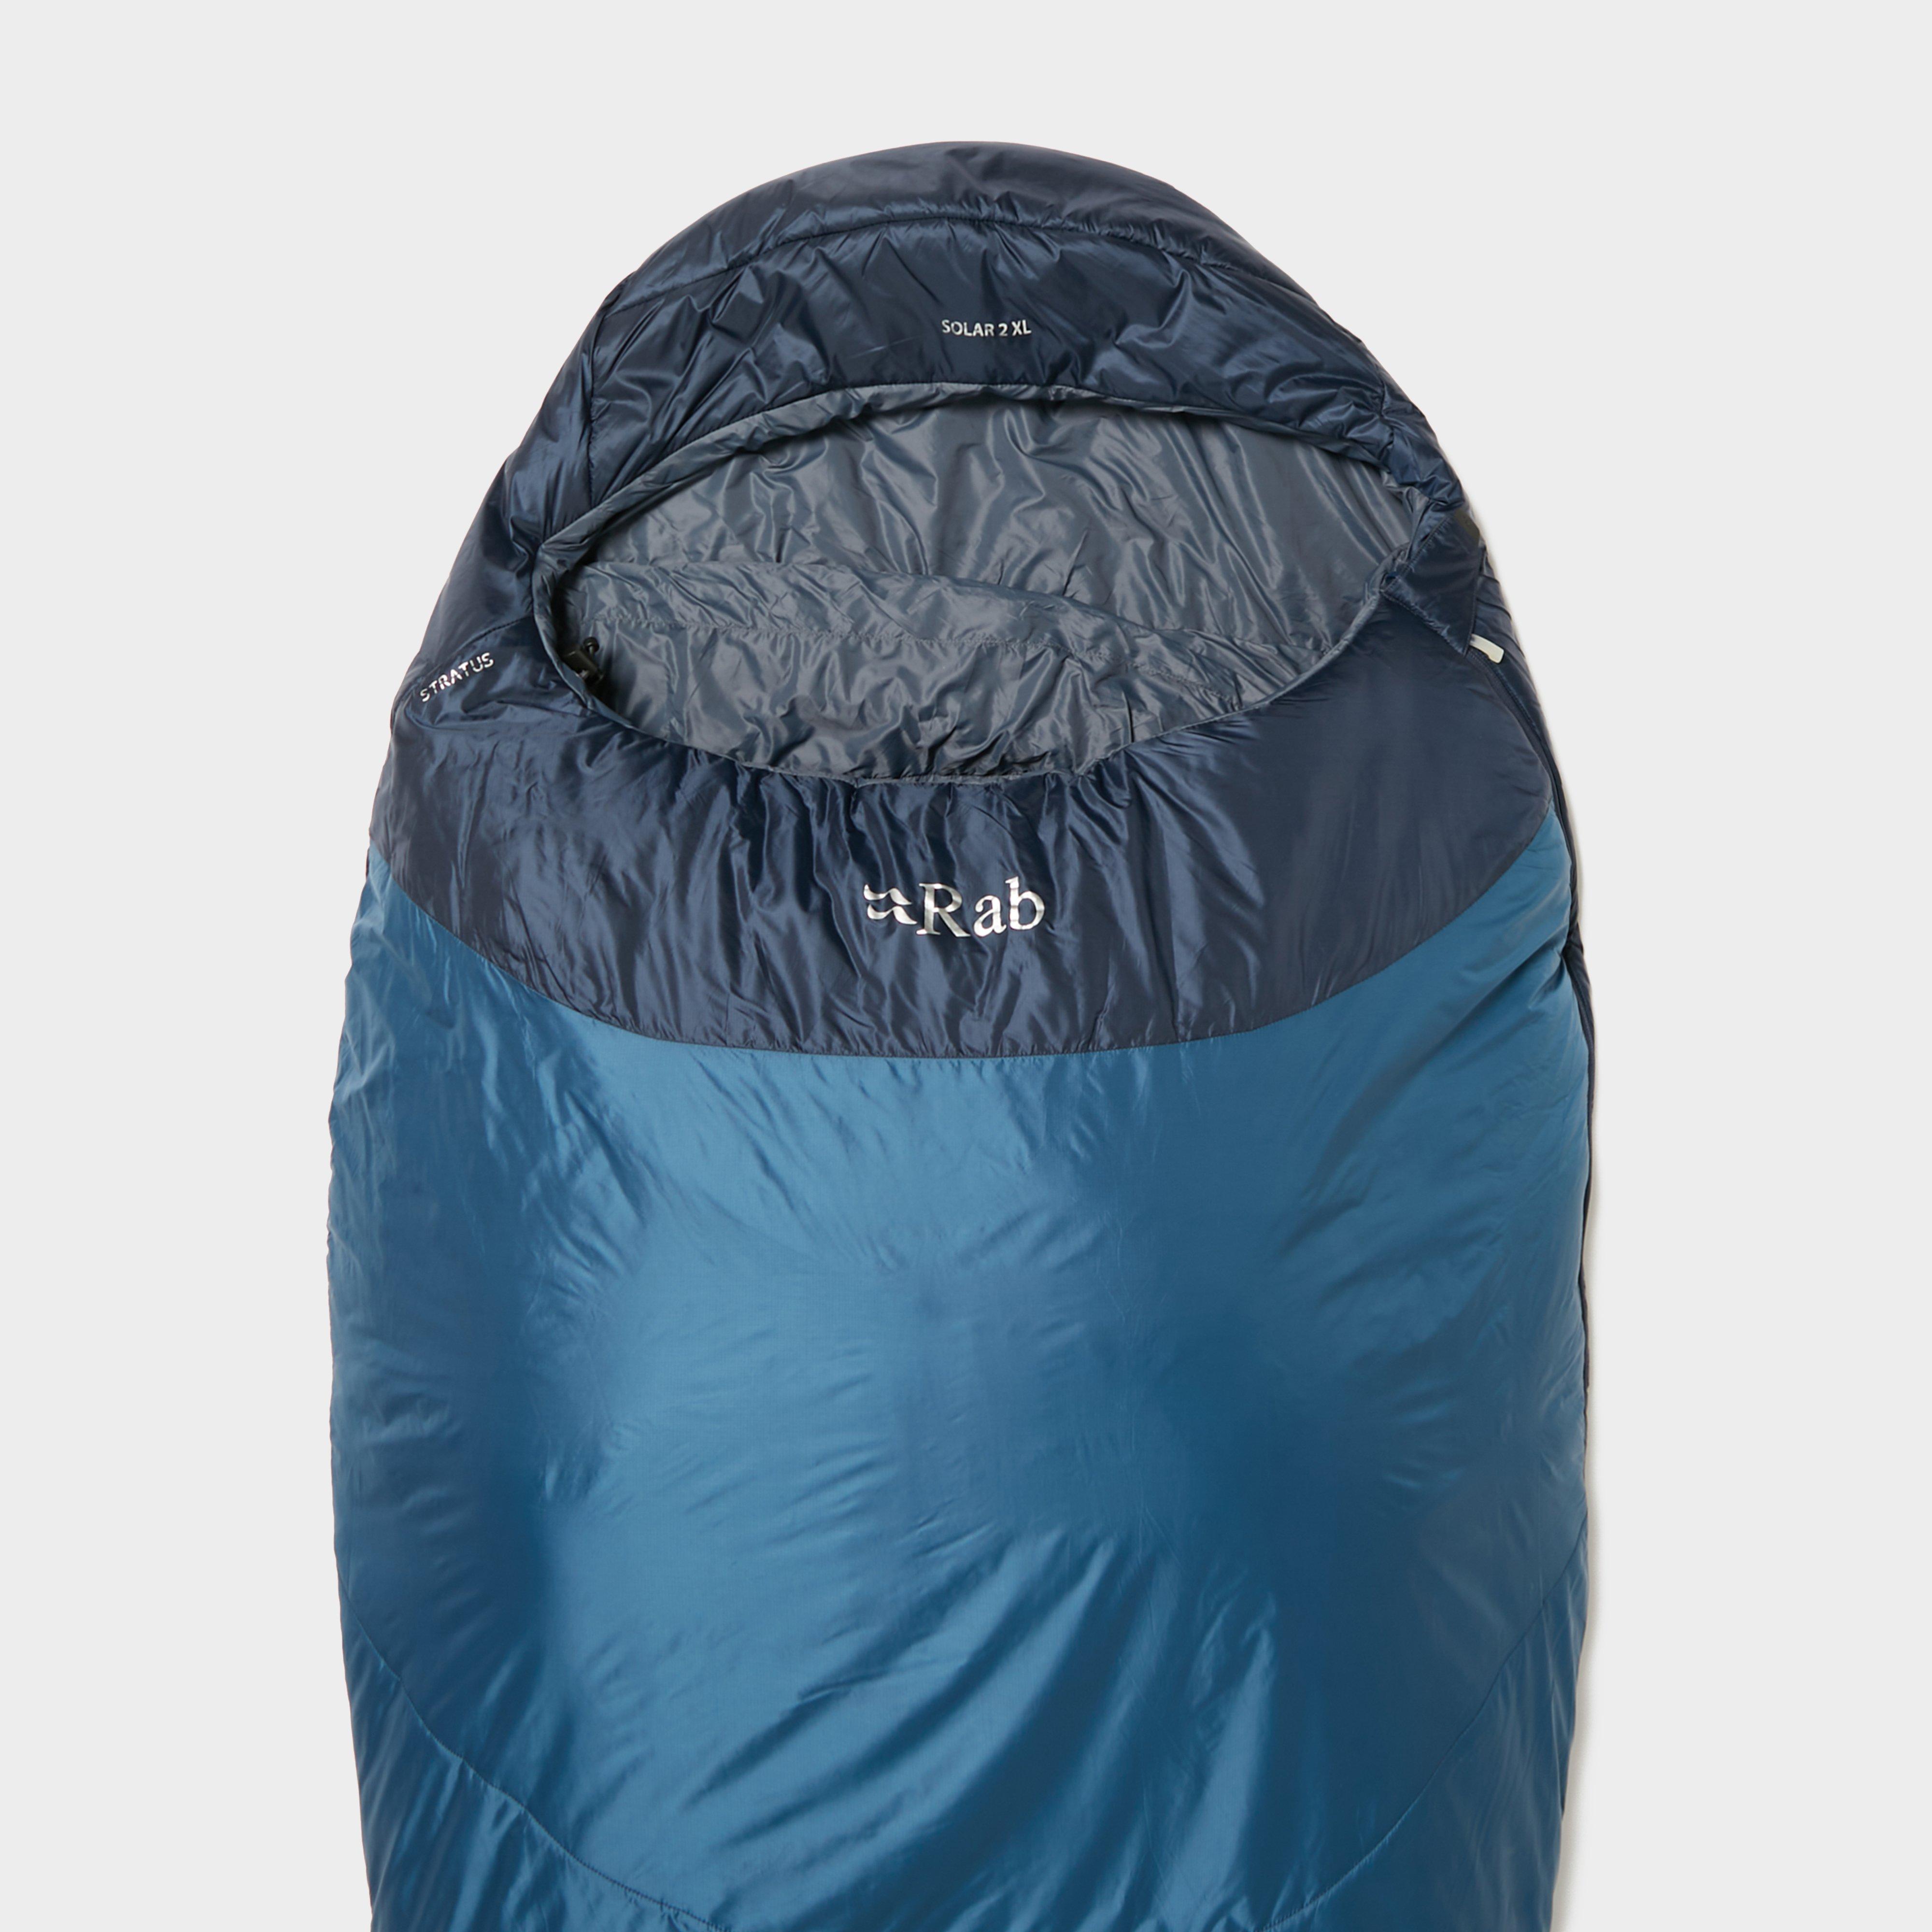 RAB Solar 2 Sleeping Bag - Tent Buyer - Compare tent prices & save ...